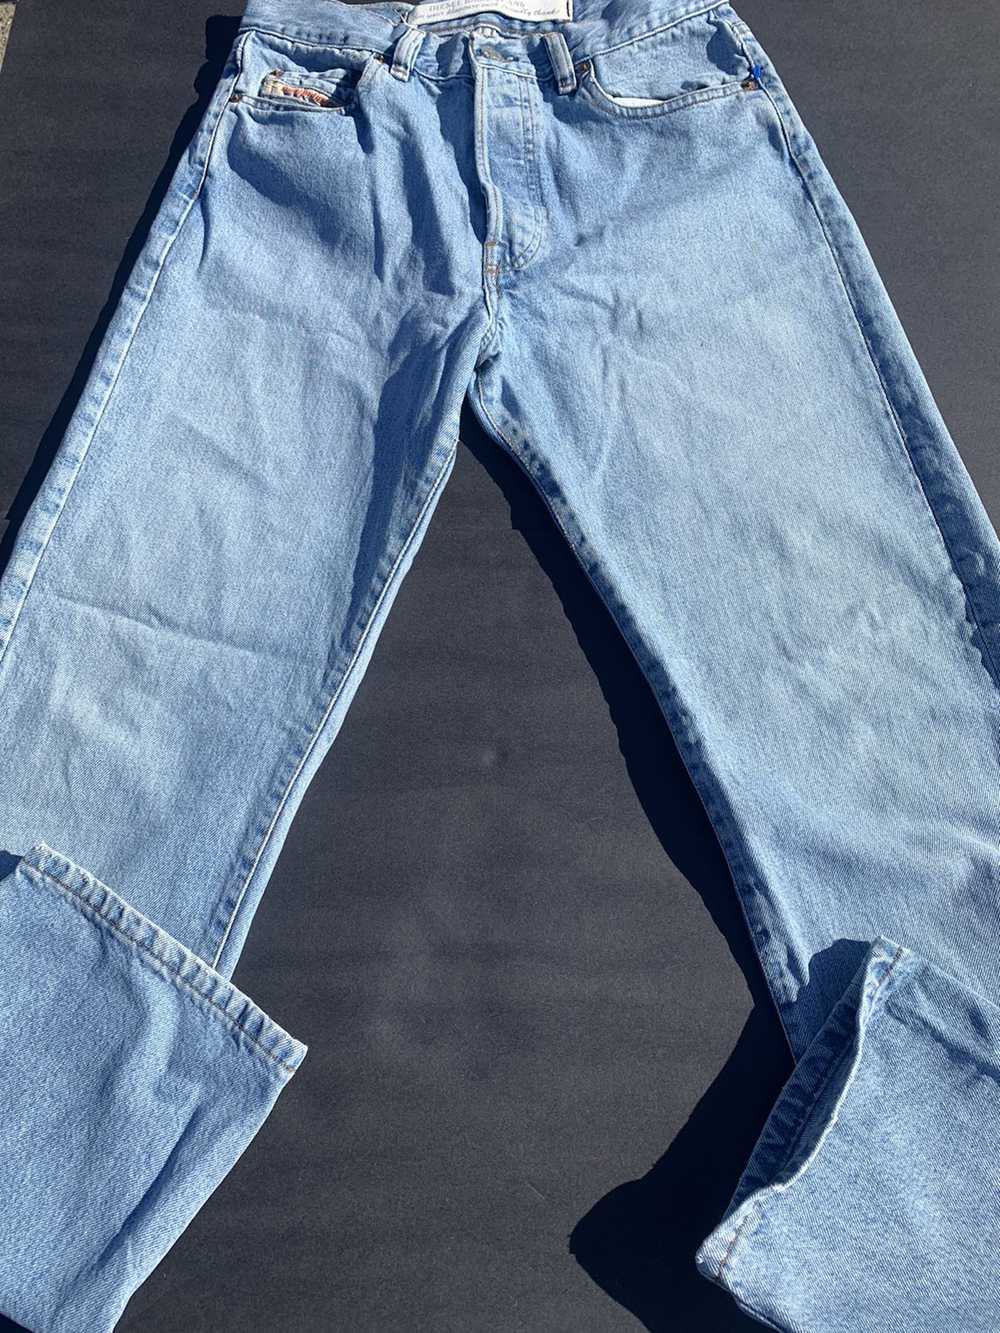 Guess Vintage guess denim jeans 90s made in USA - image 8